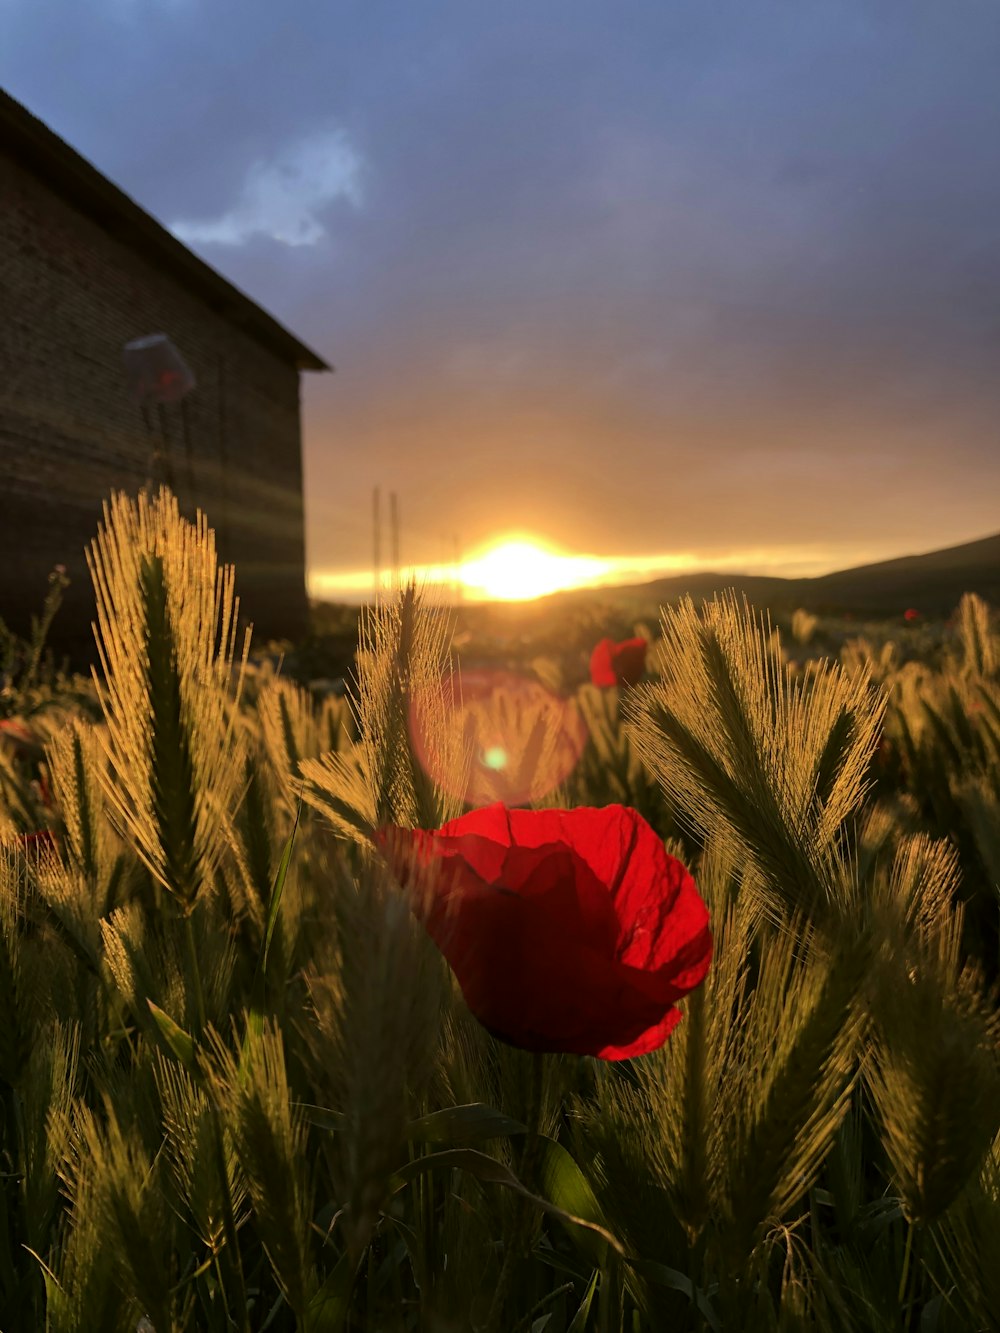 a red flower in a field with a barn in the background